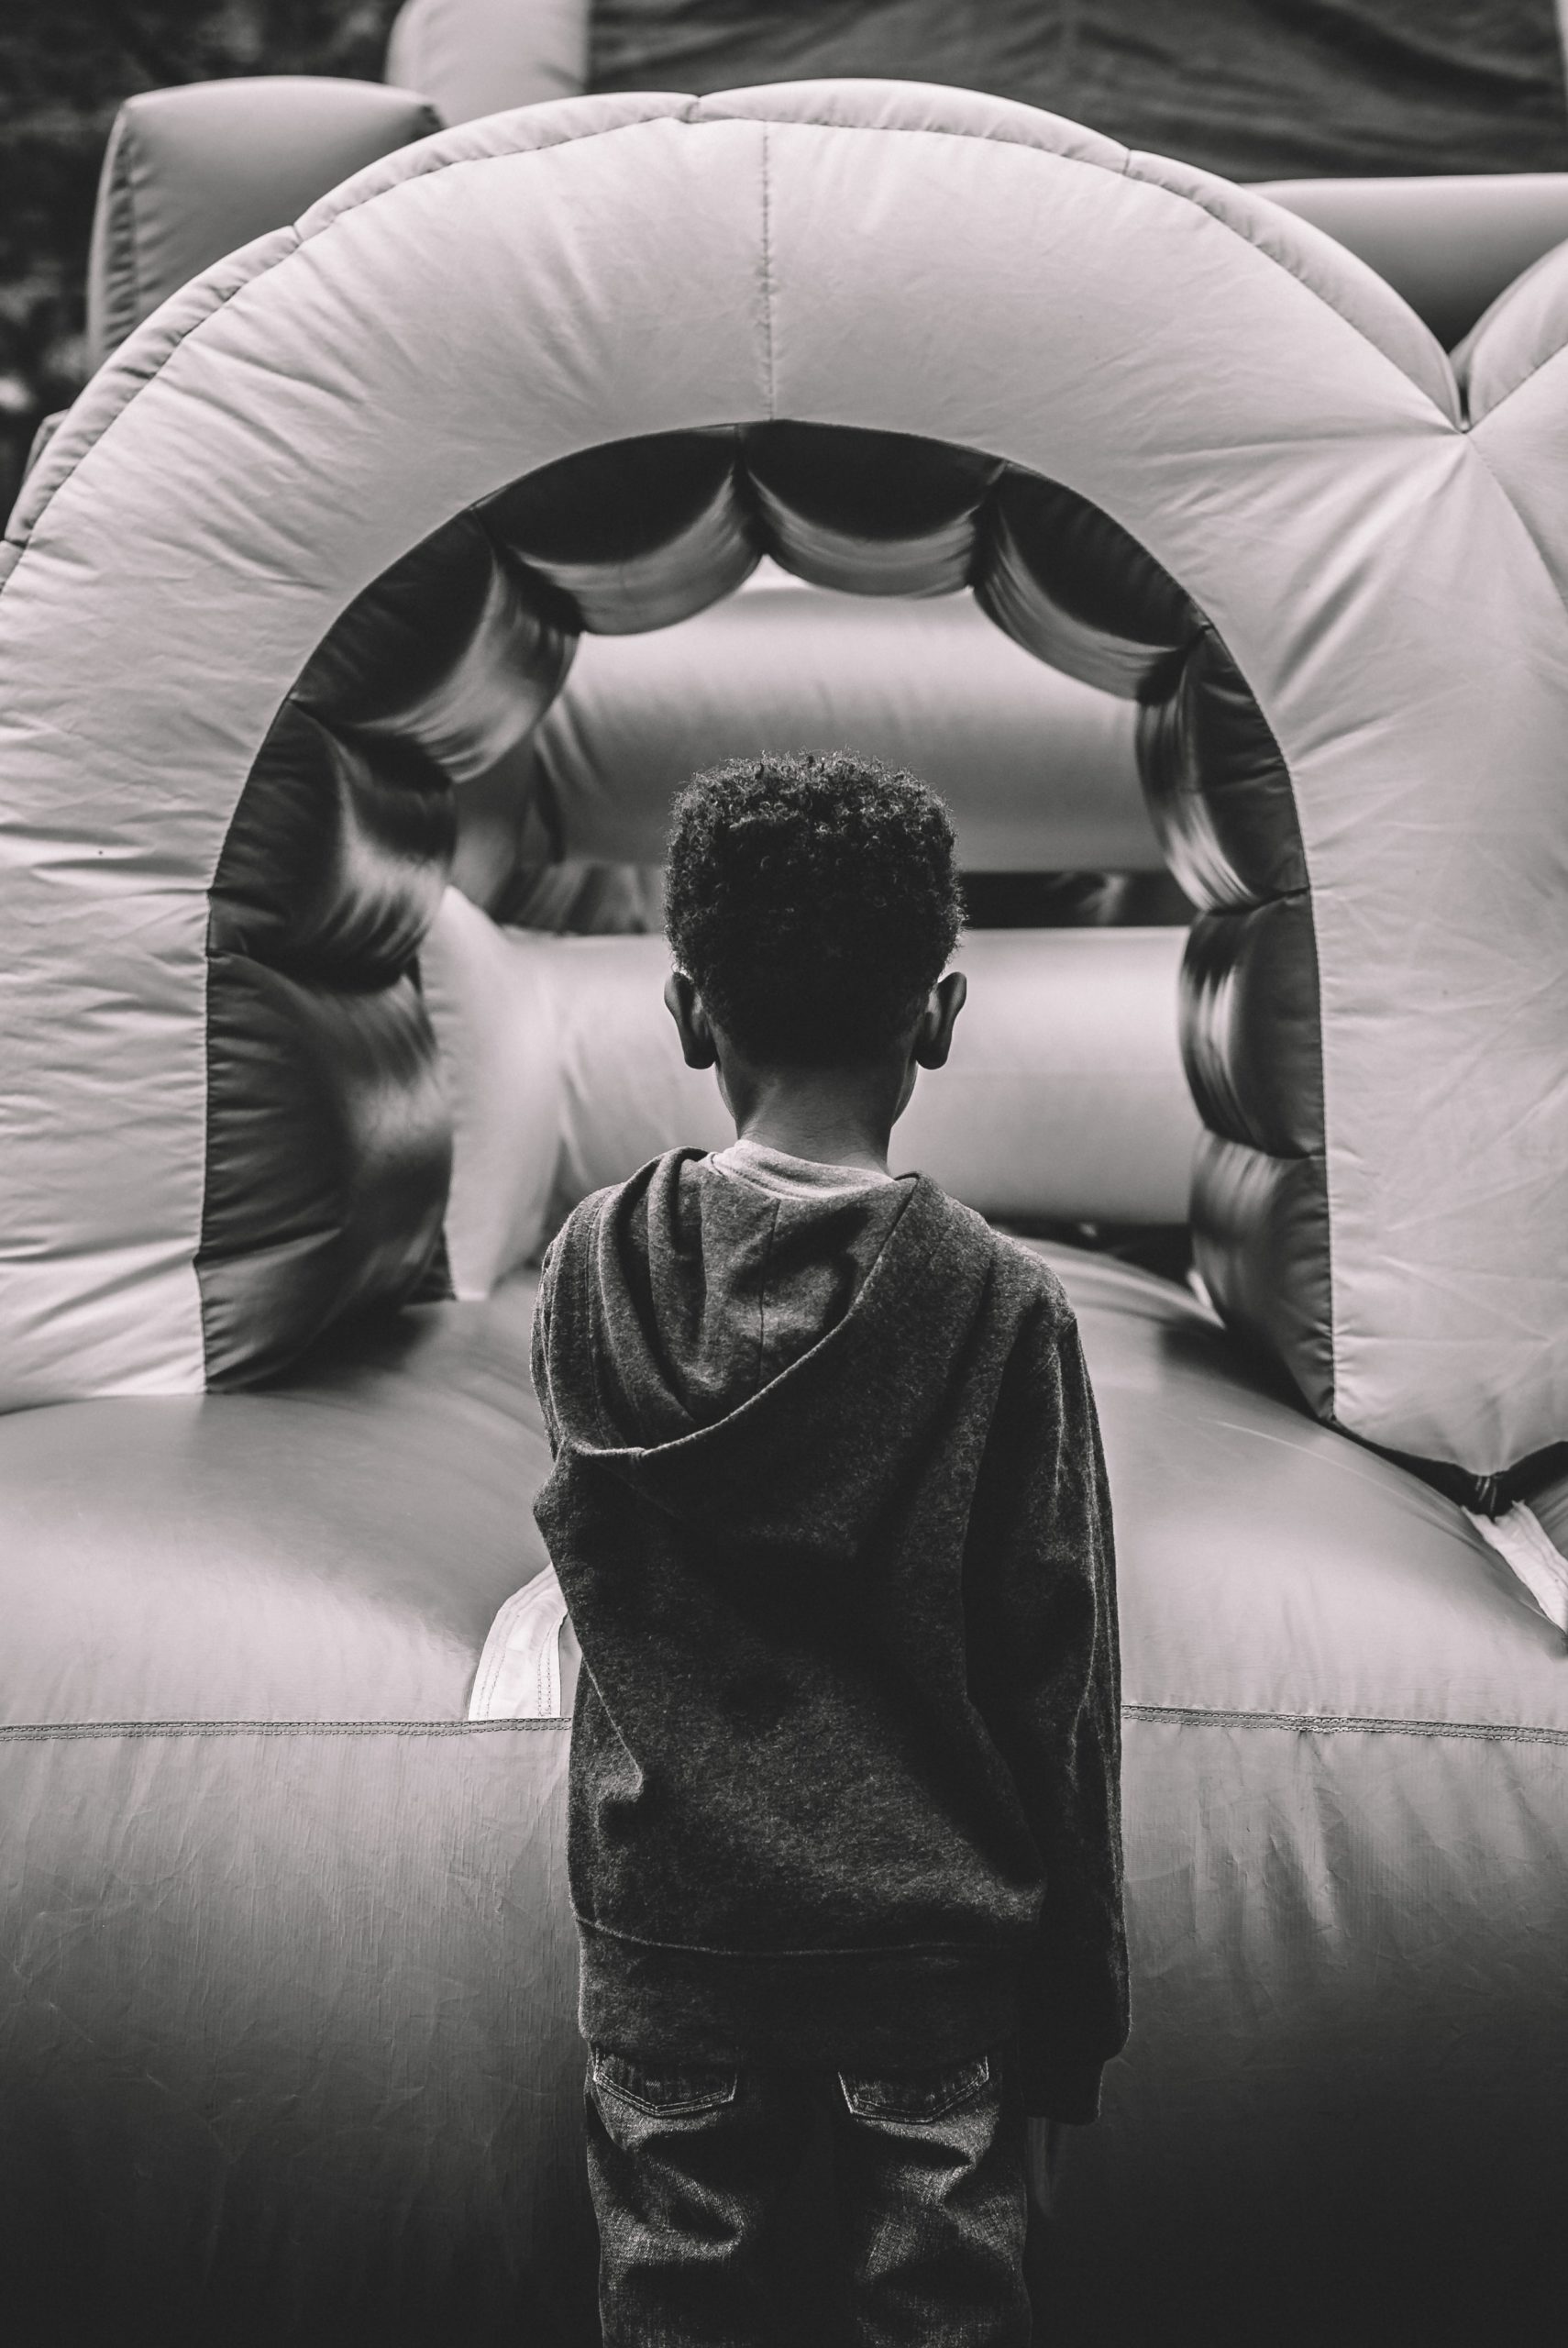 Be Careful When Renting Inflatable Equipment For Your Child’s Next Birthday Party!